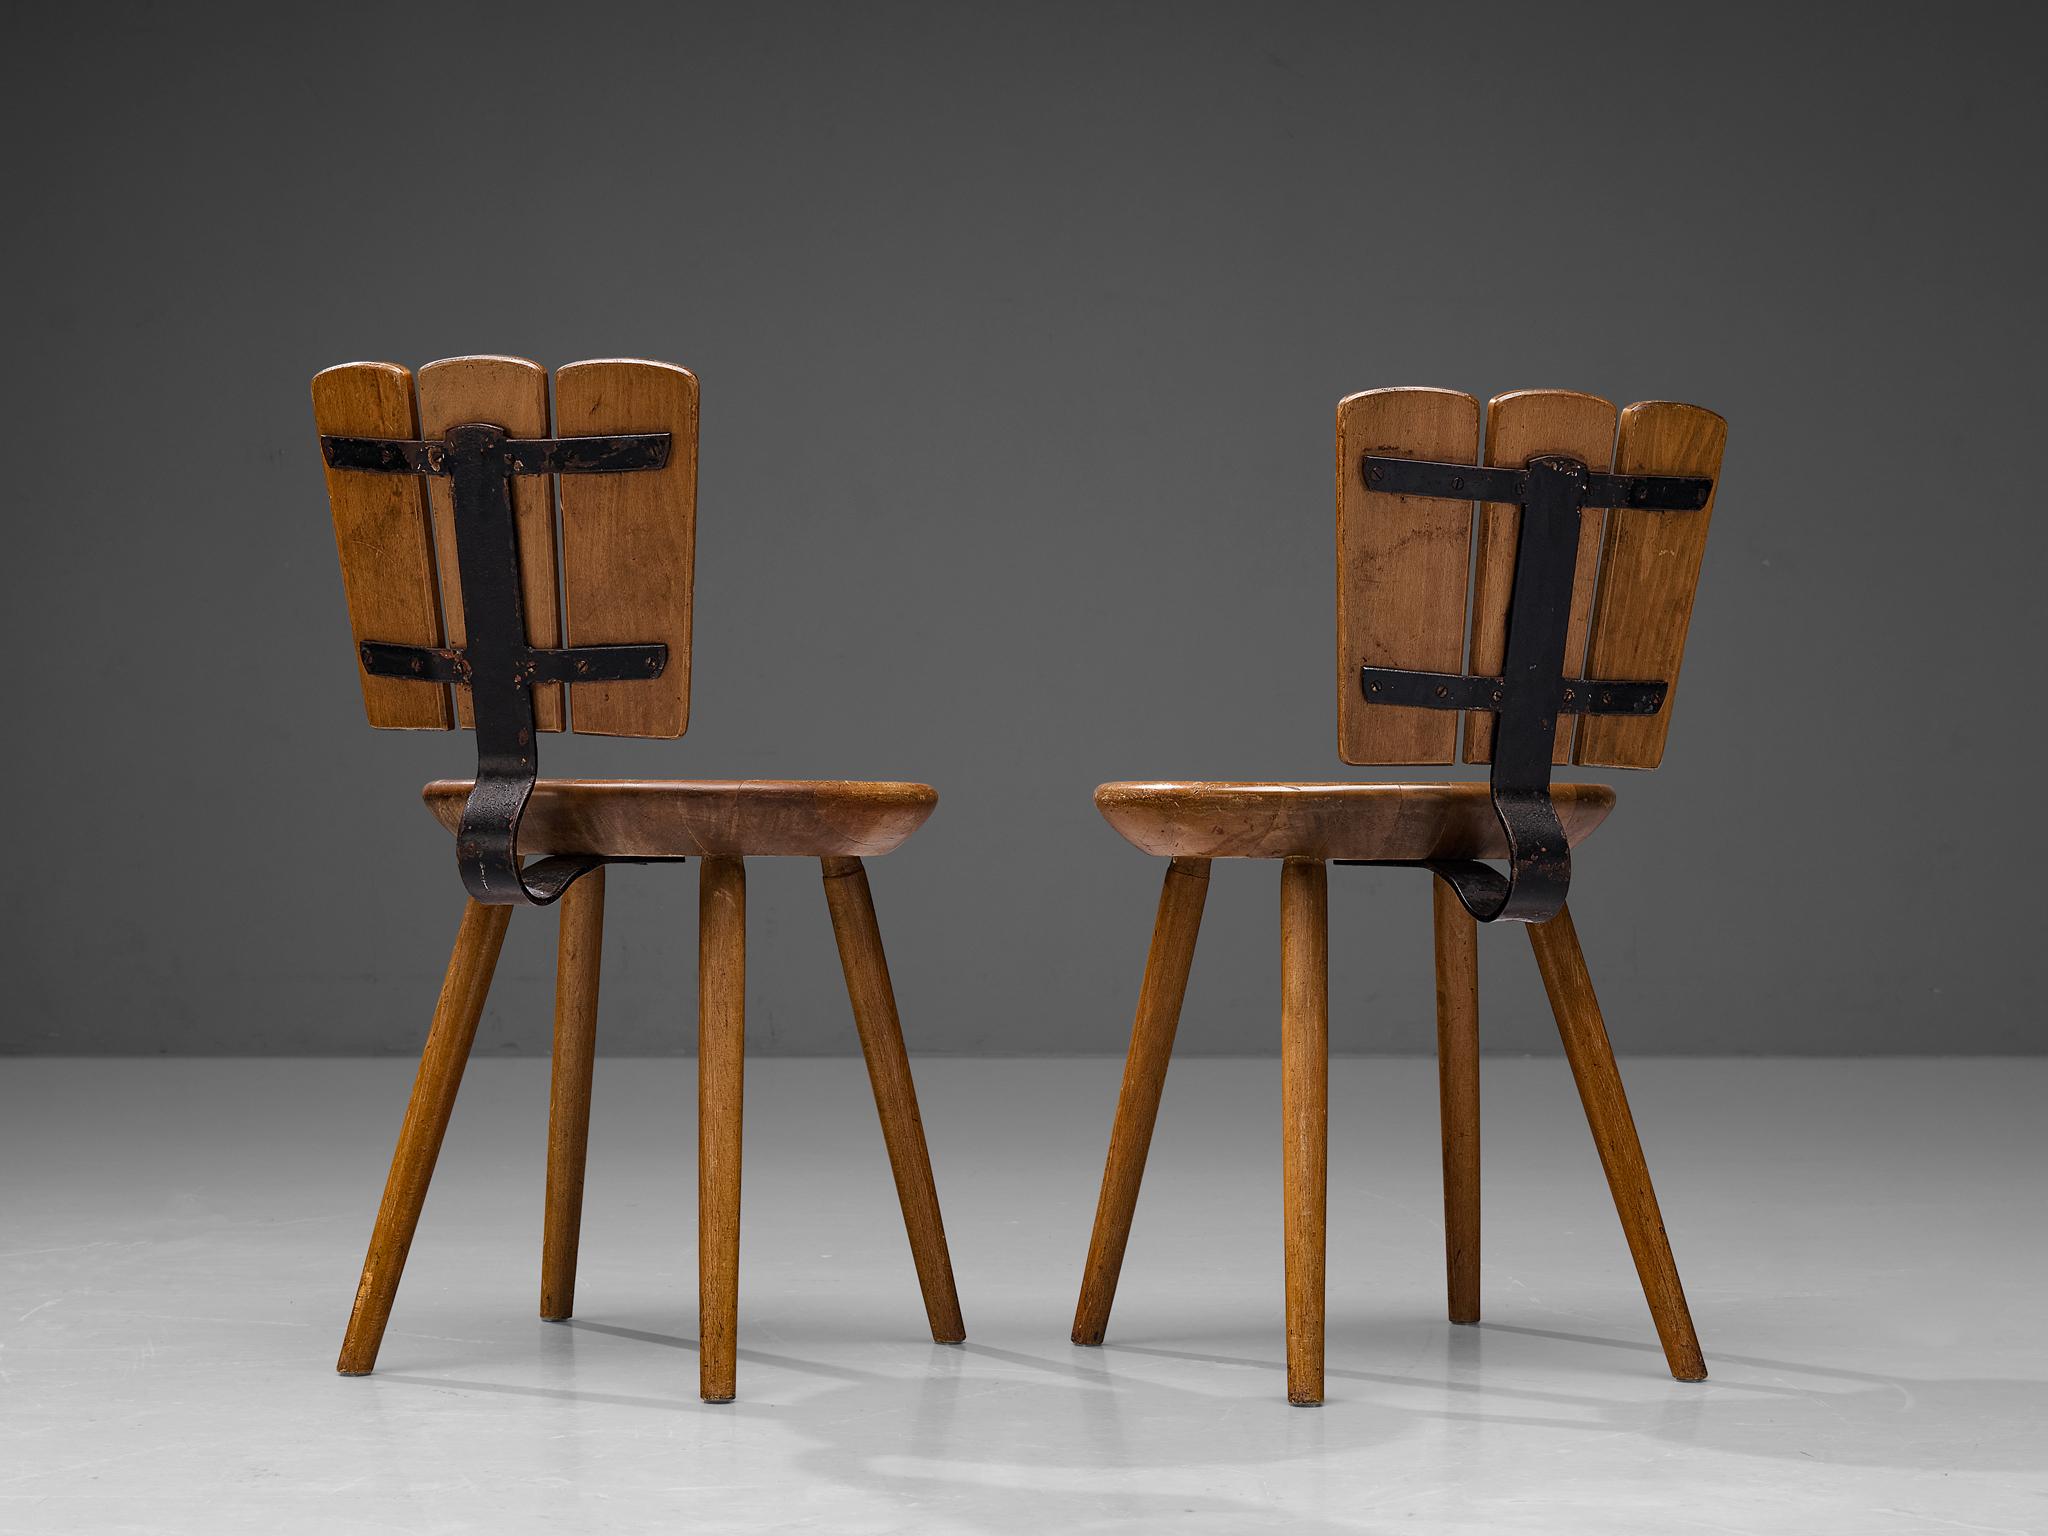 Pair of dining chairs, stained beech, cast iron, The Netherlands, 1970s. 

Rustic pair of Dutch dining chairs made in the 1970s. This design in stained beech features a curved cast iron backrest support. Despite the sturdy look of the design, these